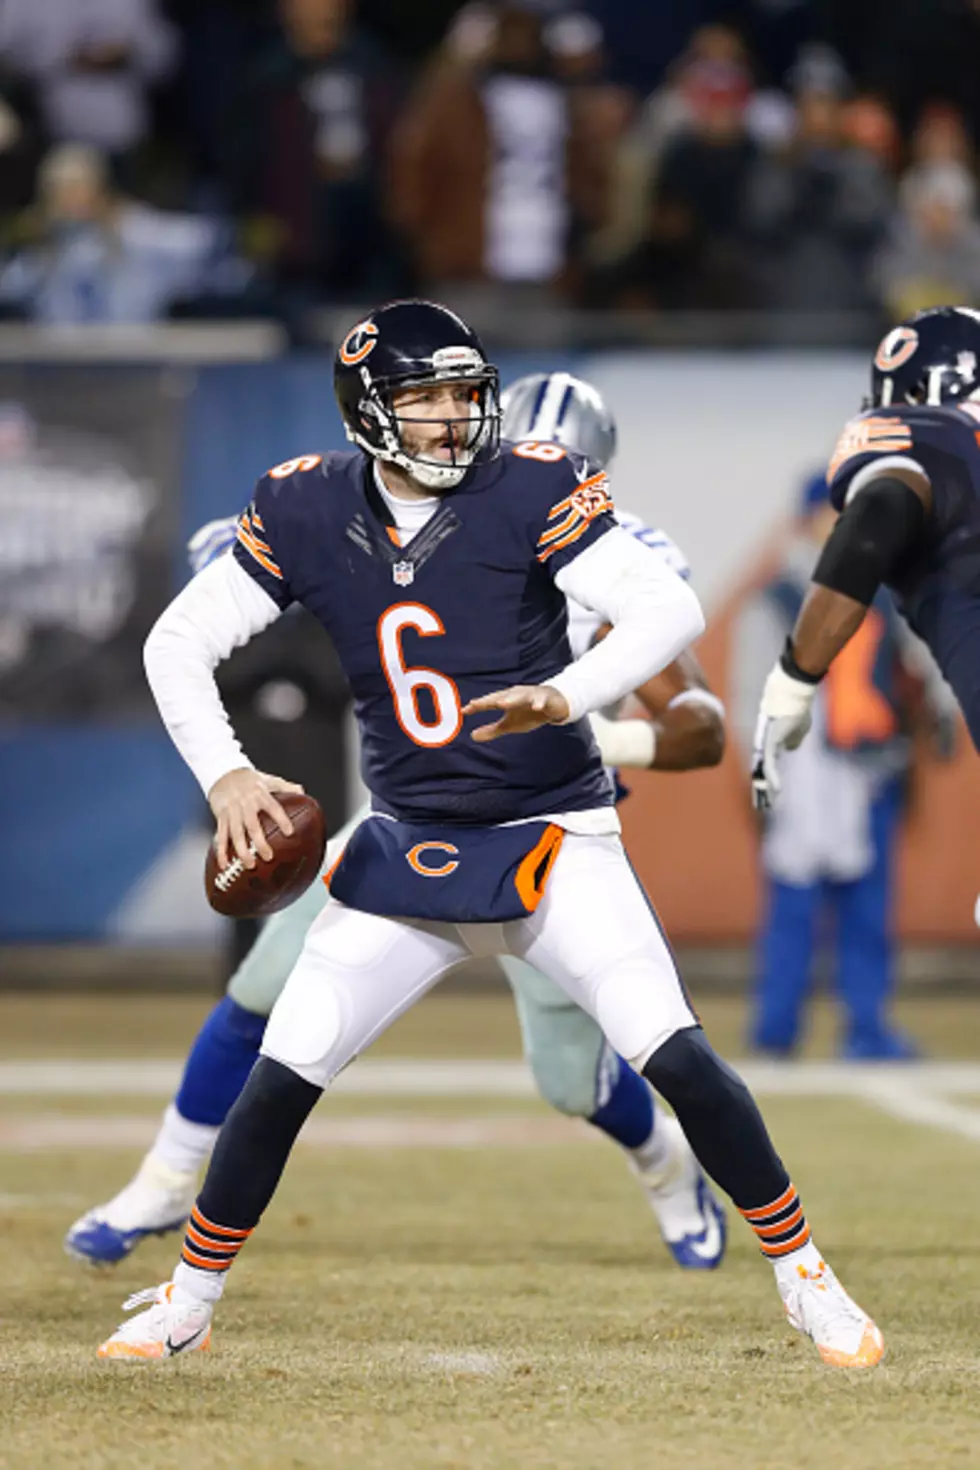 Bears Bench Cutler, Would You Want Him?